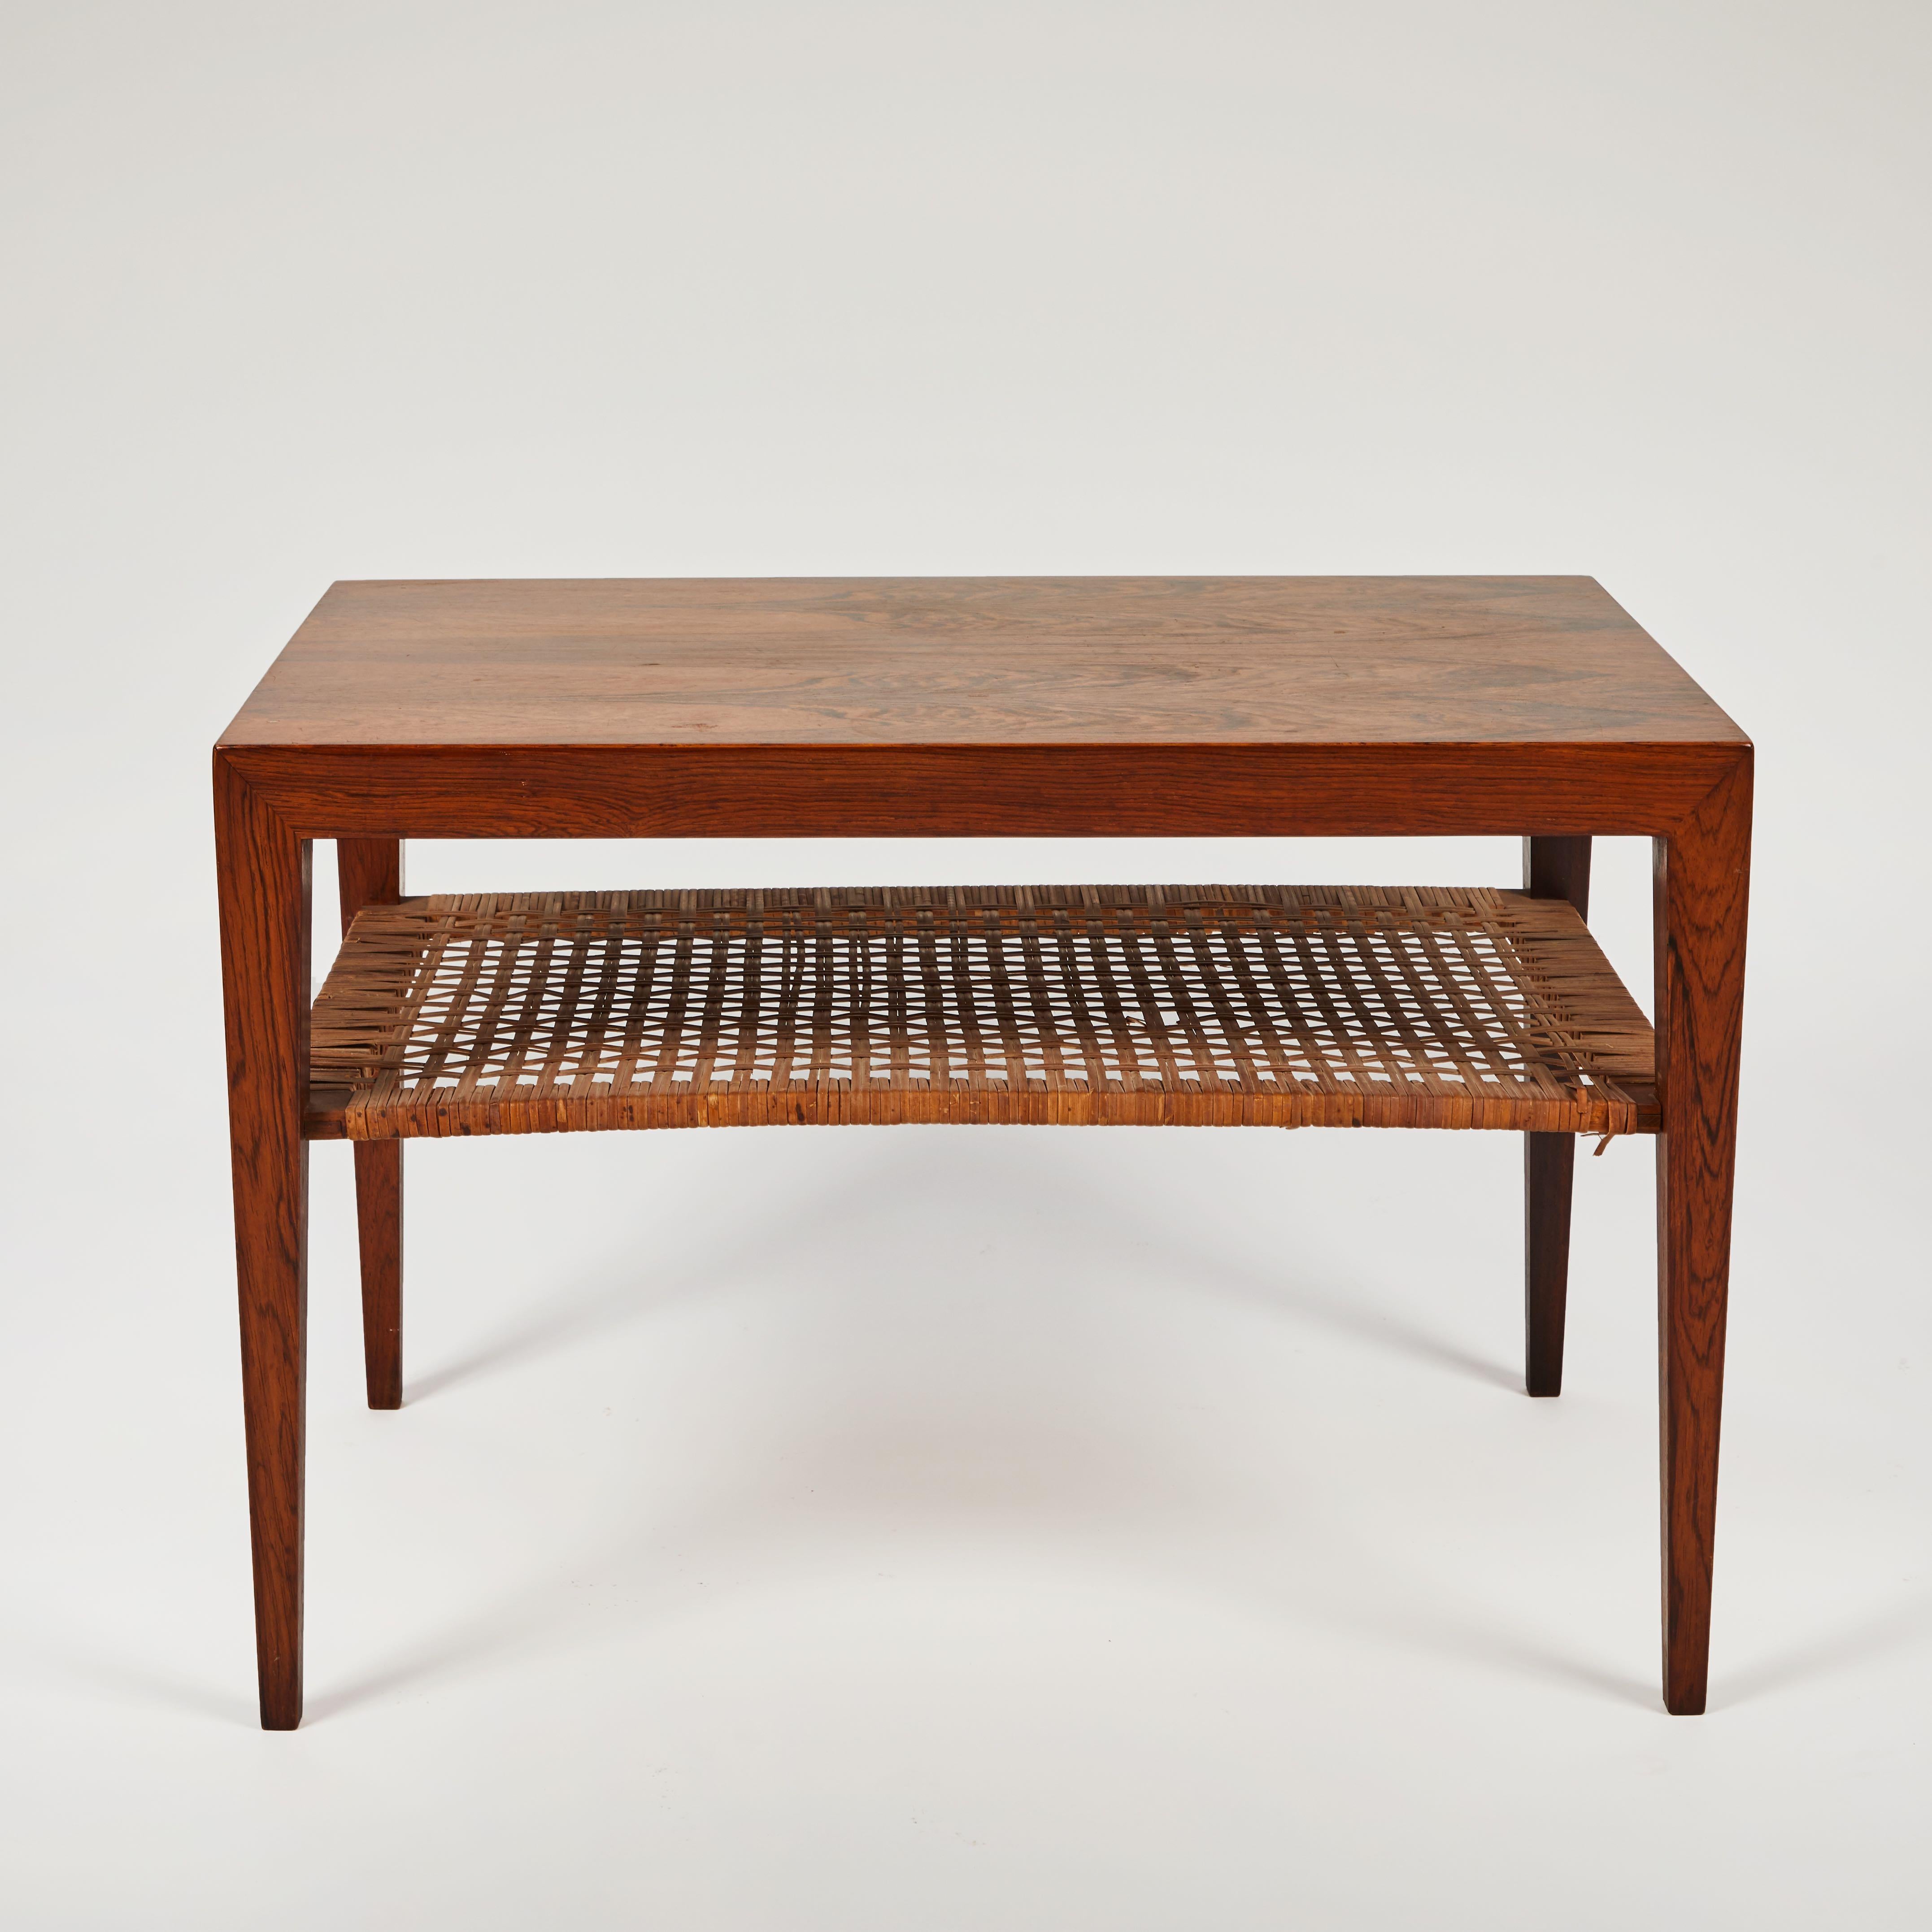 Two-tiered mid-century walnut coffee or end table with rattan shelf.